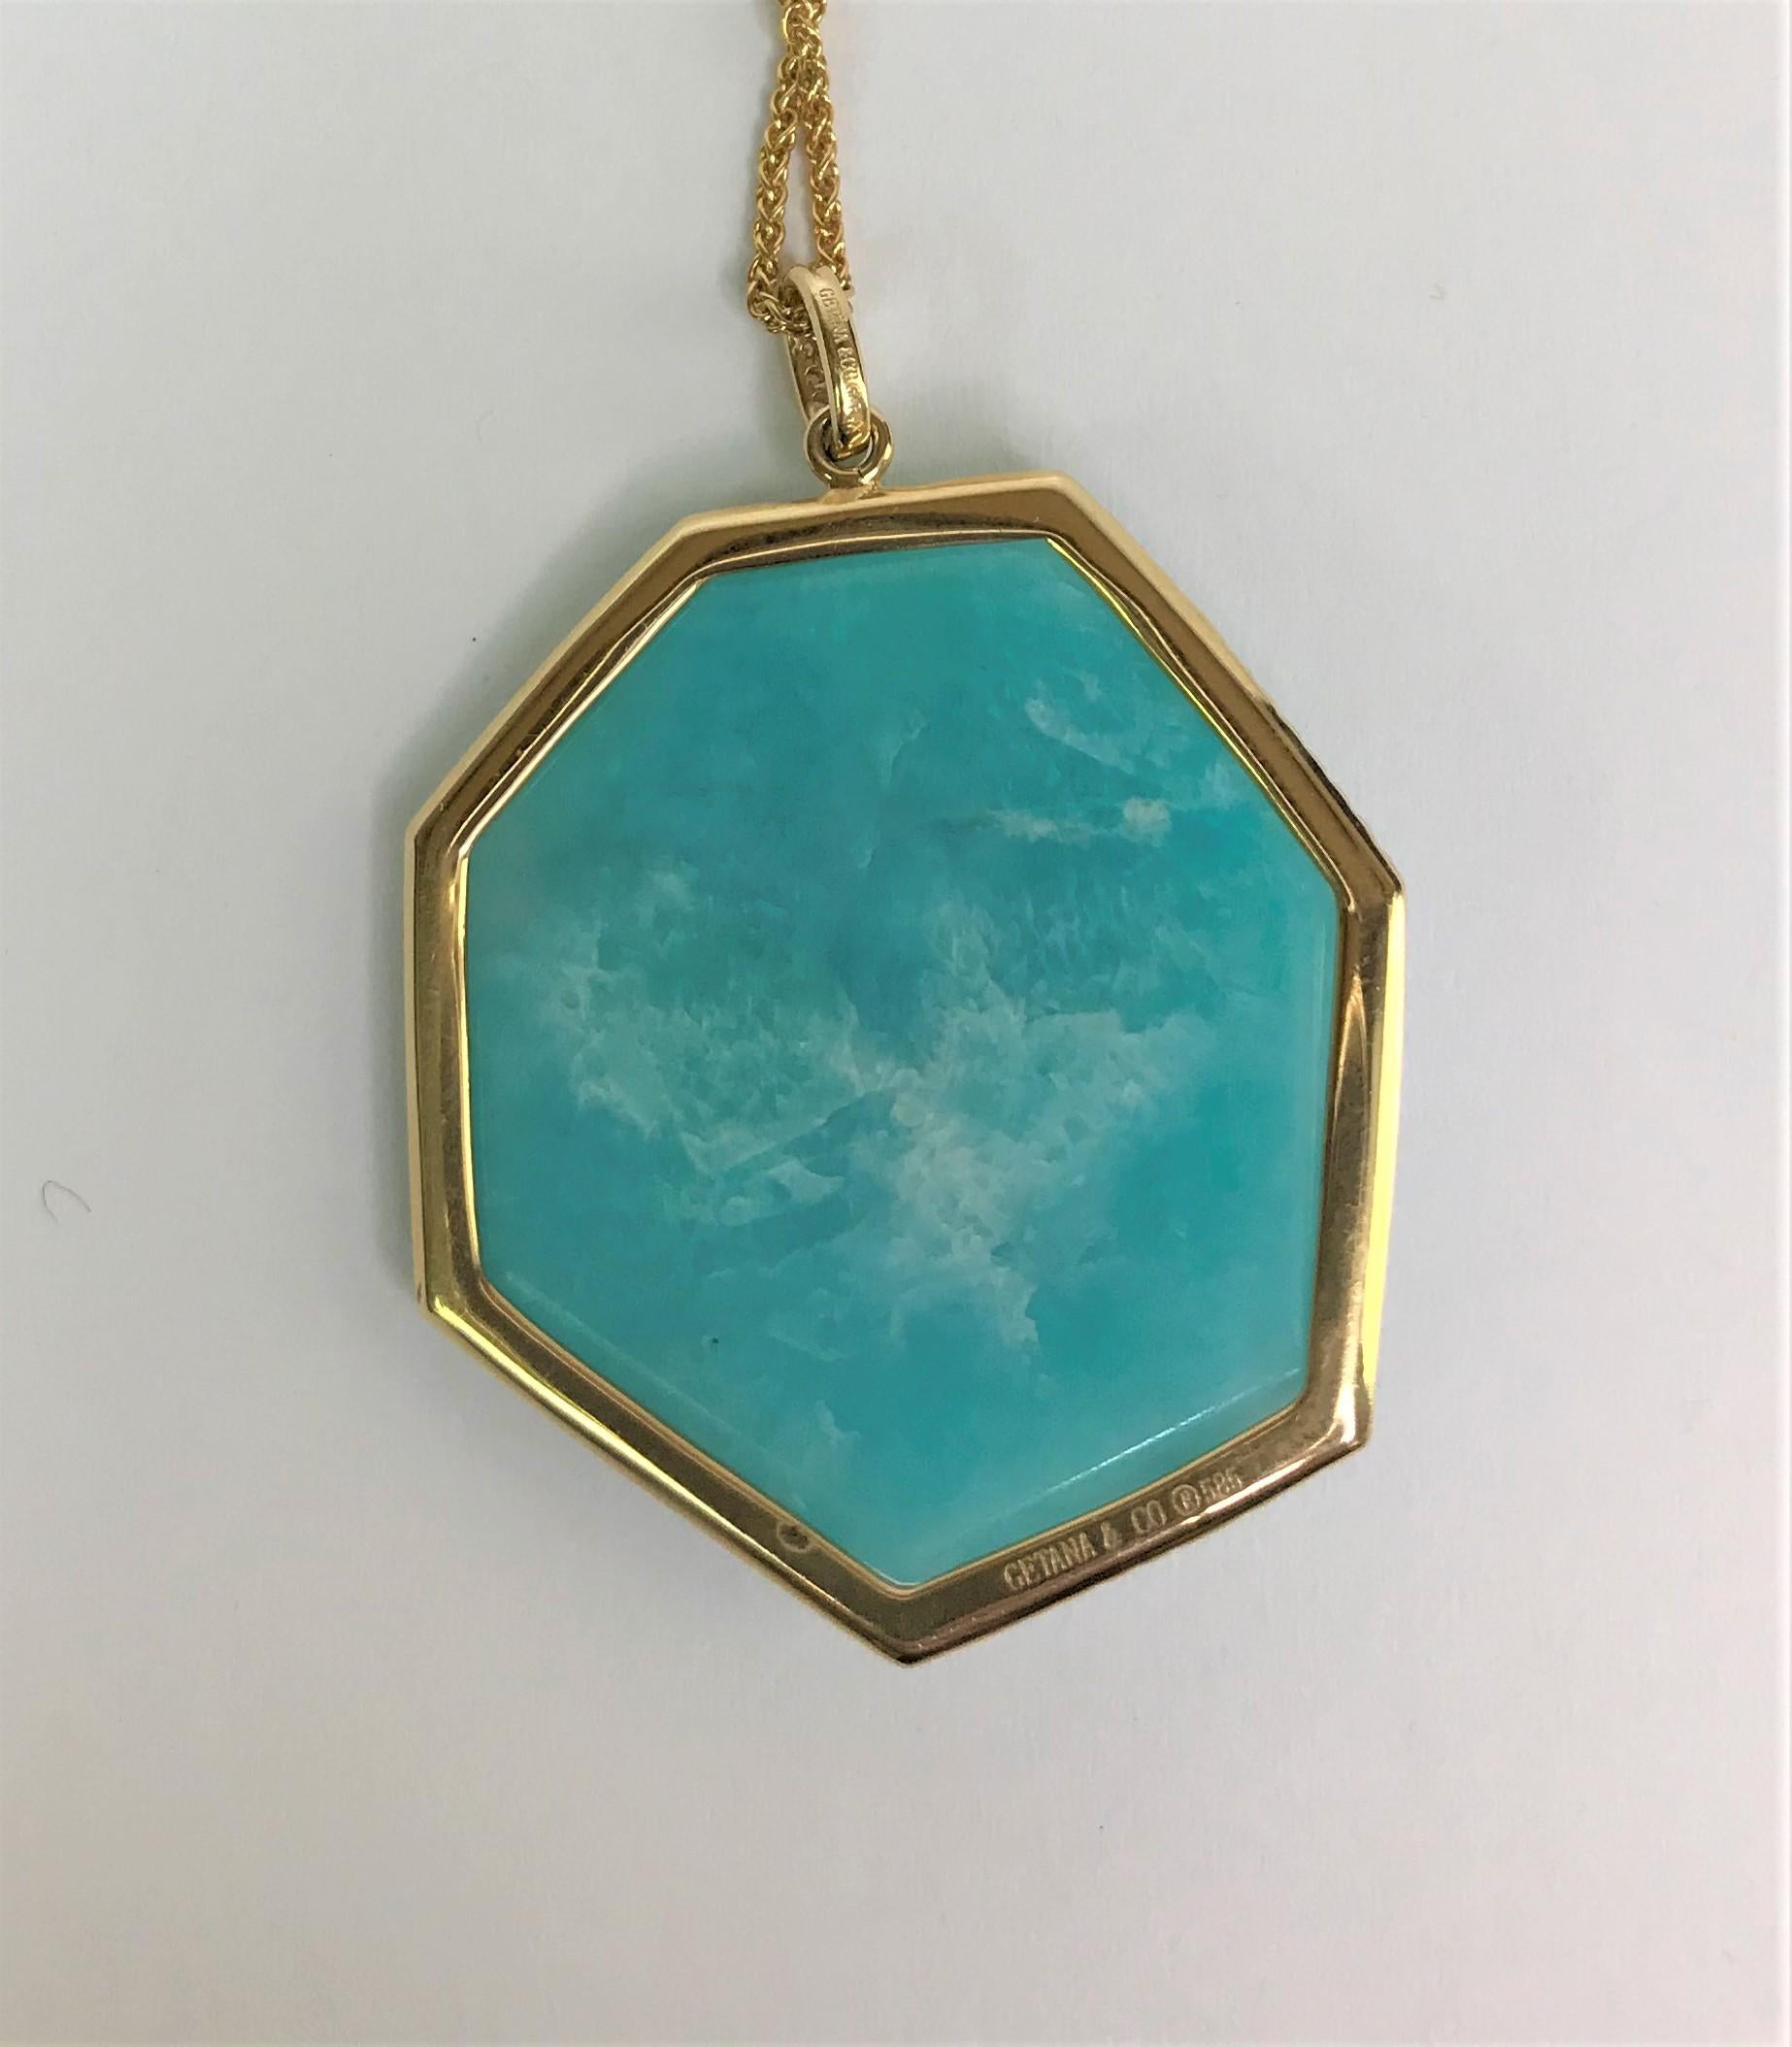 By designer Getana & Co.
14 karat yellow gold
Bluish green freeform amazonite with a halo of diamonds.  Beautiful color!
Bail also has diamonds
Approximately .28 total diamond weight
Overall pendant approximately 32mm x 29mm
Pendant stamped 